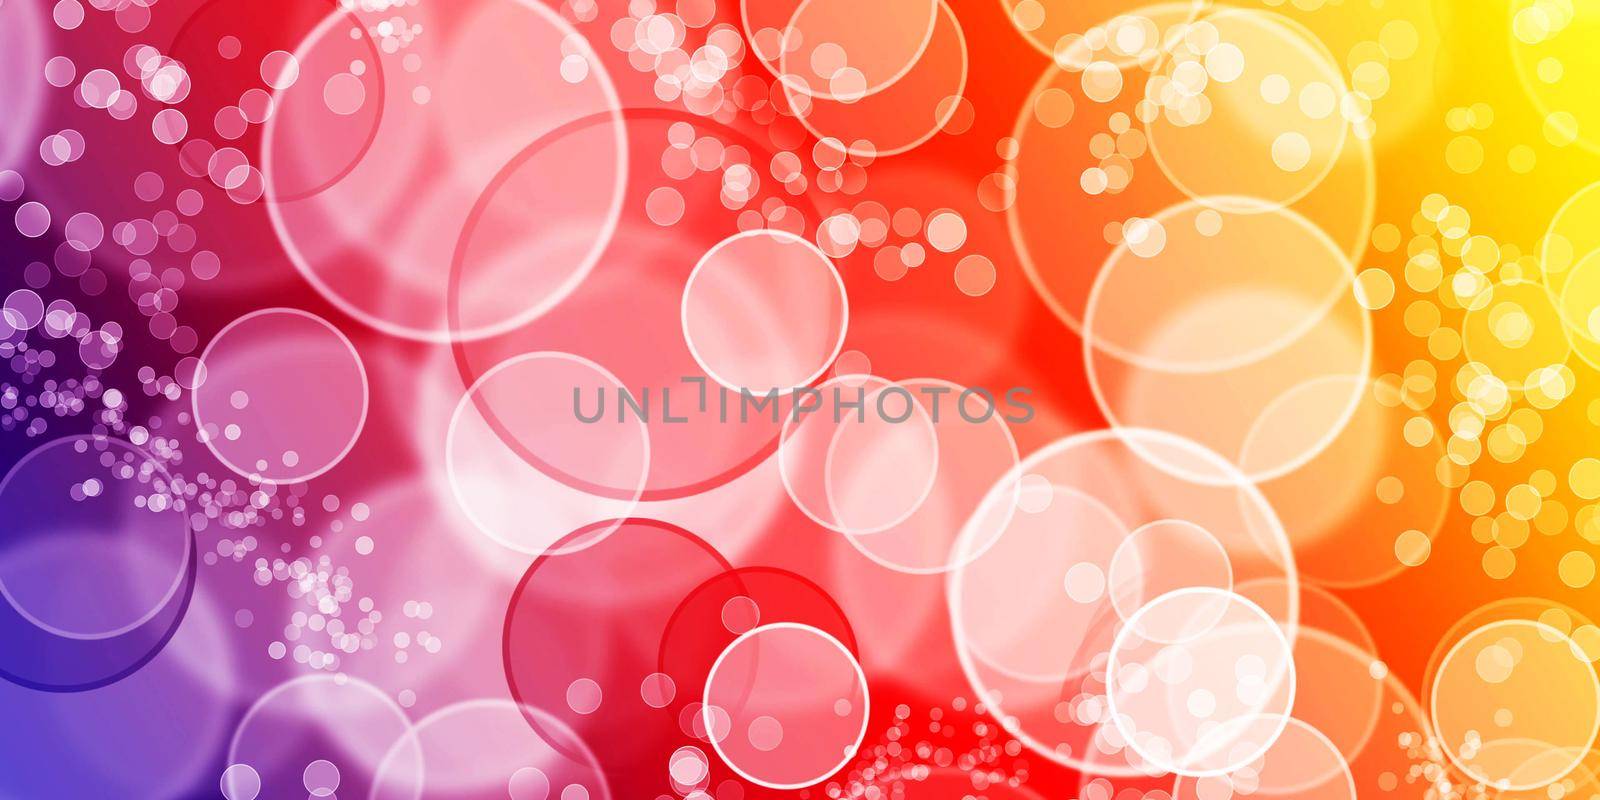 Background  perfect for wrappers, wallpapers, postcards, greeting cards, wedding invitations, romantic events. by TravelSync27